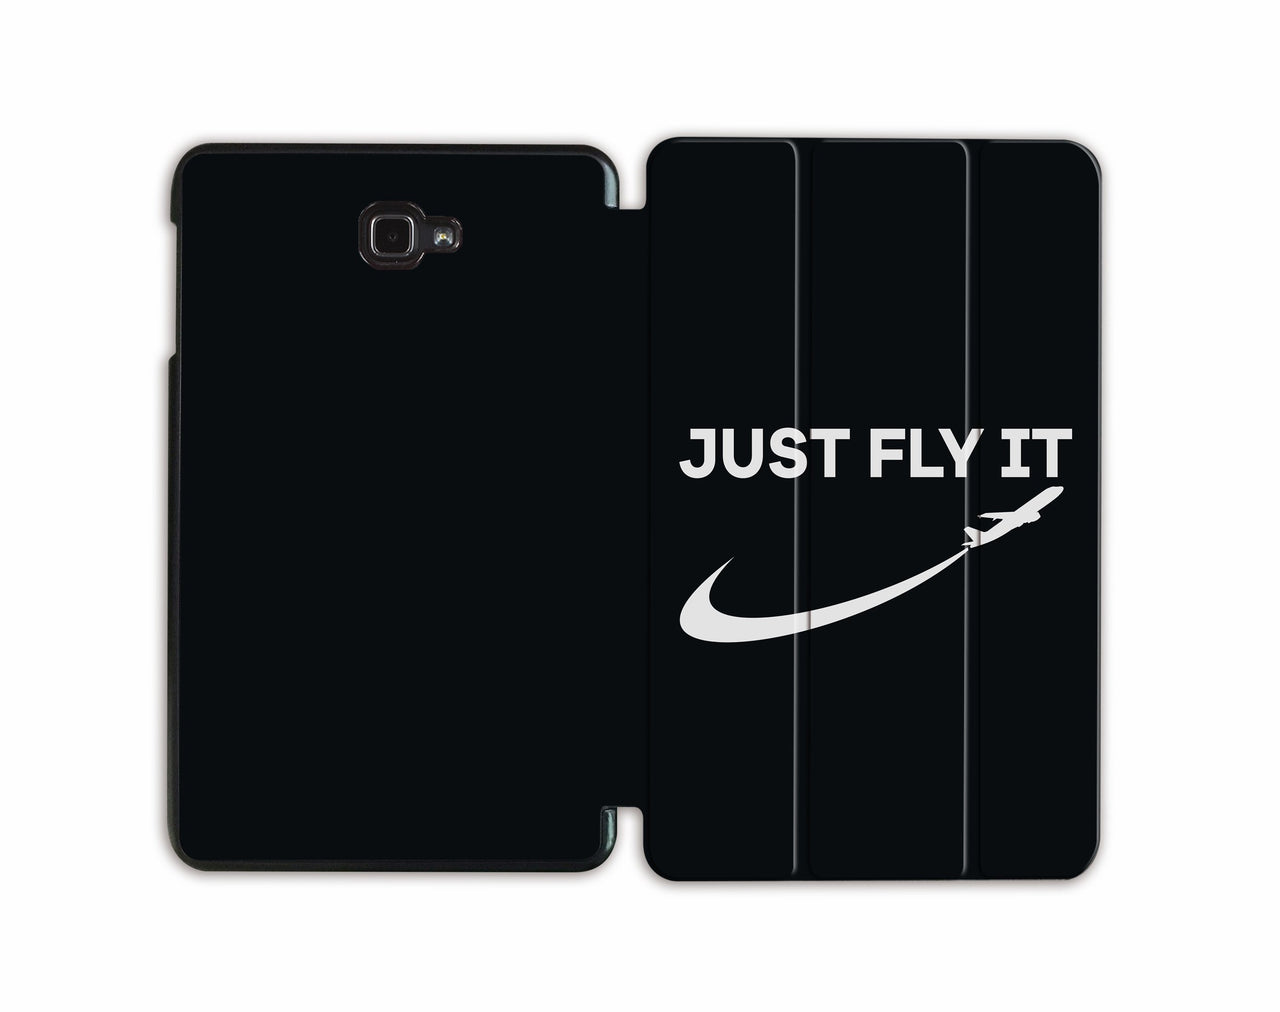 Just Fly It 2 Designed Samsung Cases